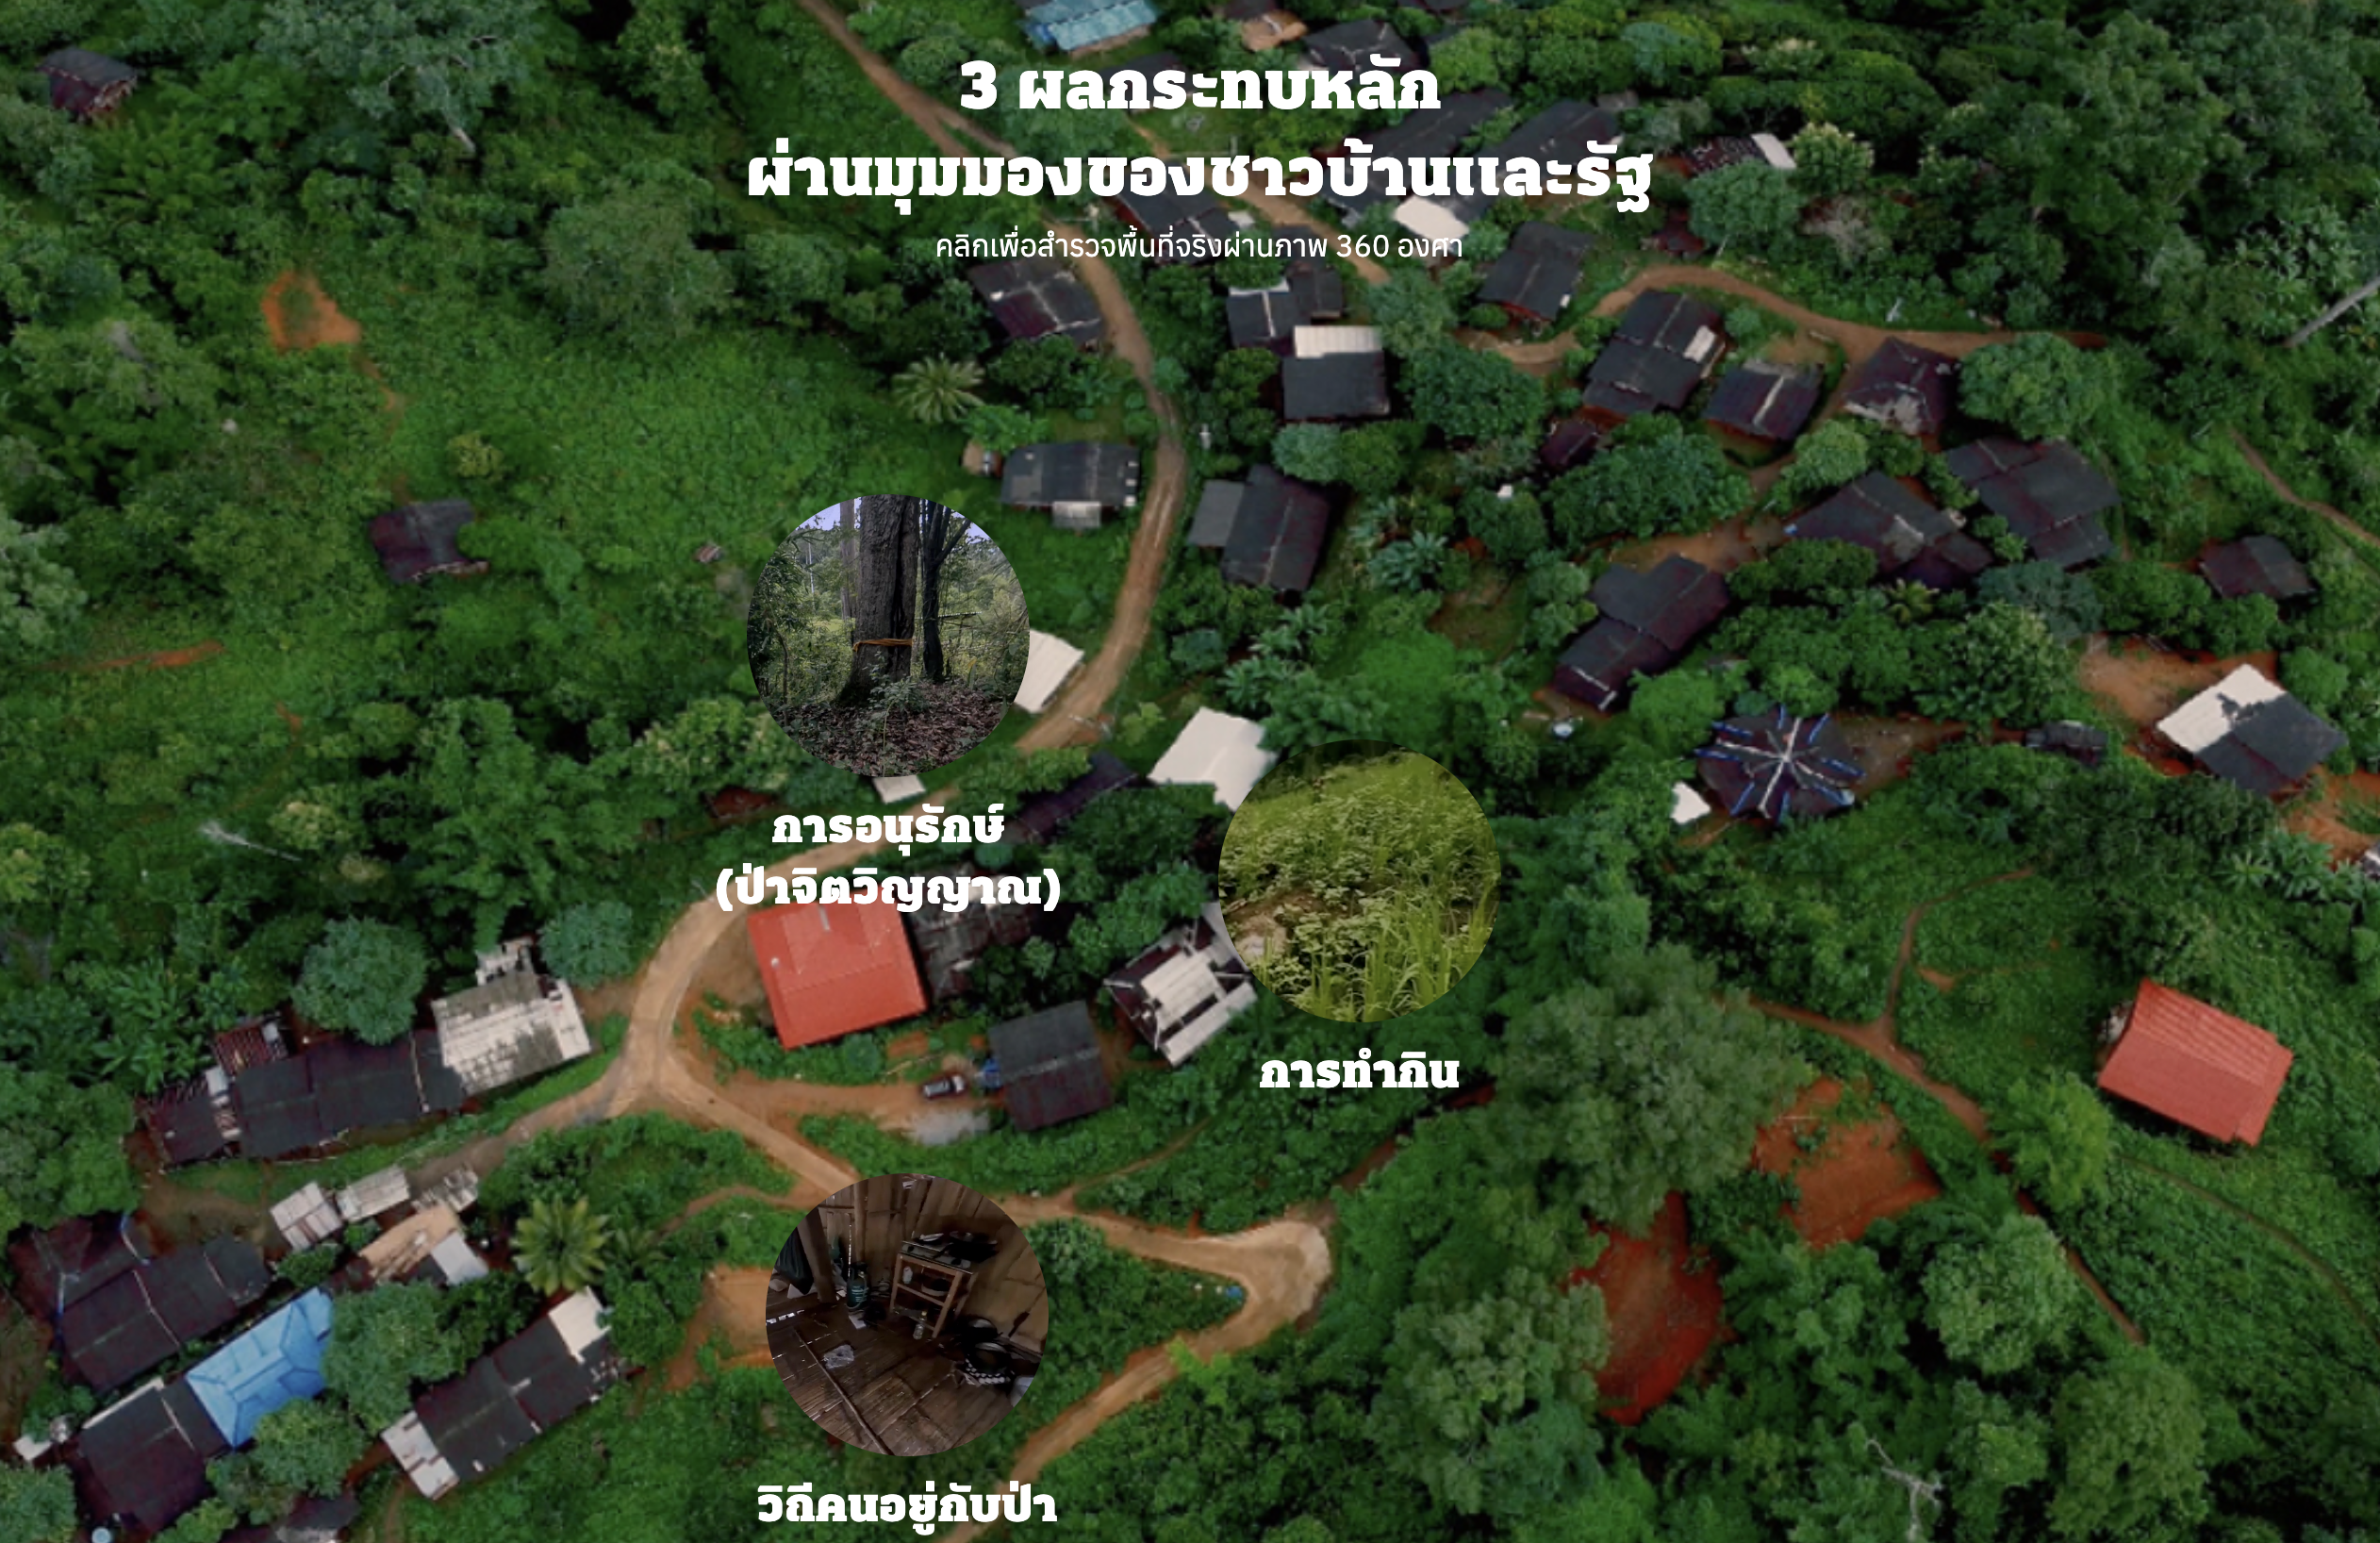 An aerial overview of a Thai forest with three zoom-in buttons featuring interview videos with villagers.